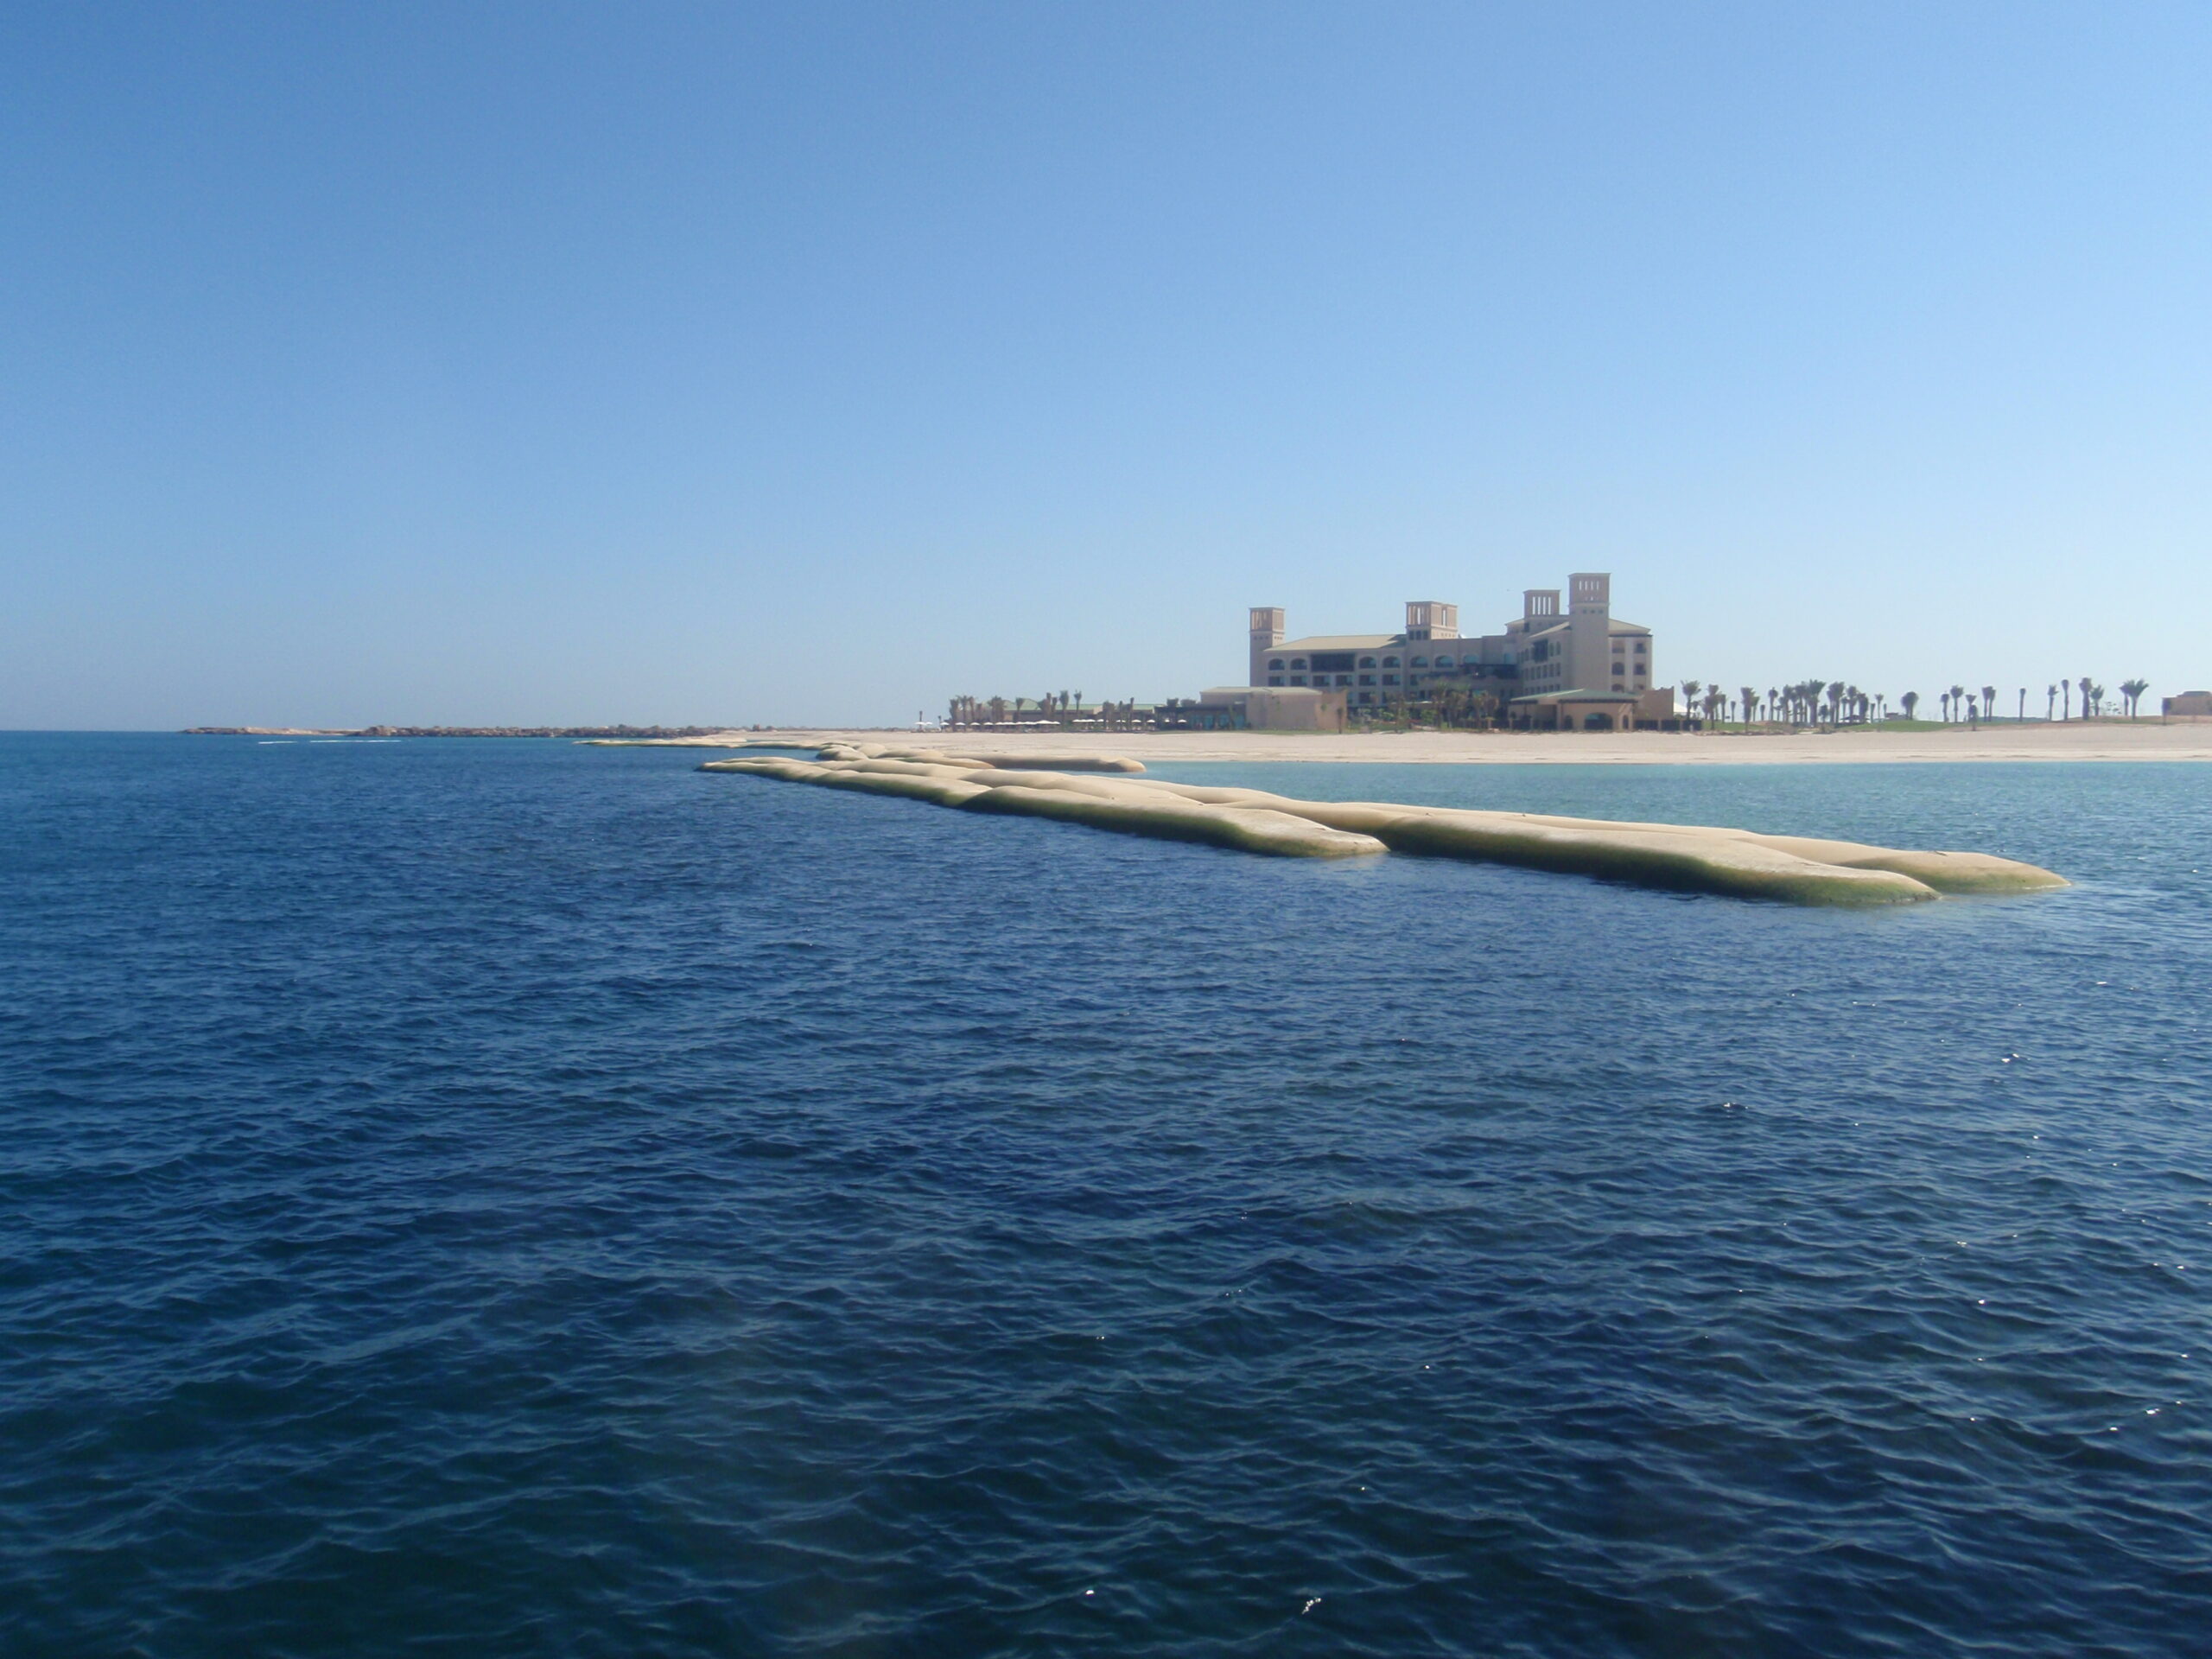 Our road to COP28: Sir Bani Yas Island's eco-friendly breakwater